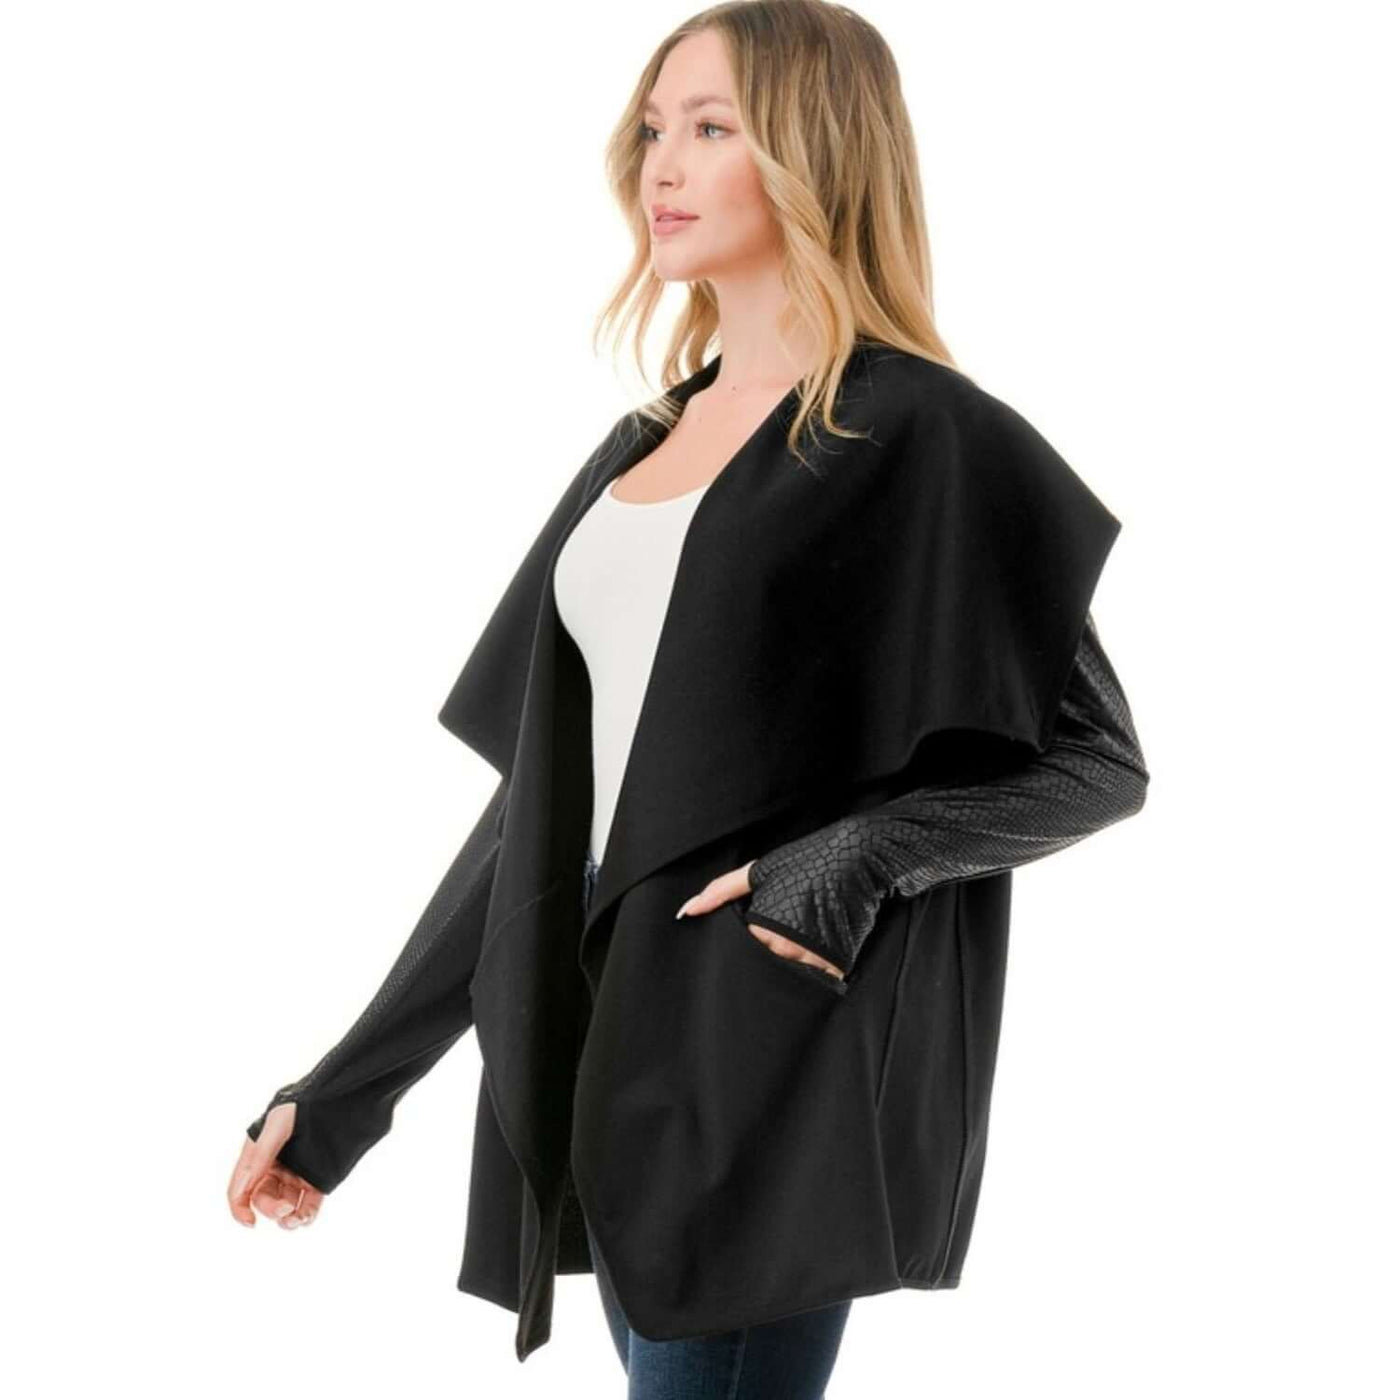 Made in USA Trendy Unique Women's Black Open Front Jacket with Faux Leather Sleeves, Thumbholes, Snap Lapel Closure and Side Pockets | Classy Cozy Cool Women's Made in America Clothing Boutique